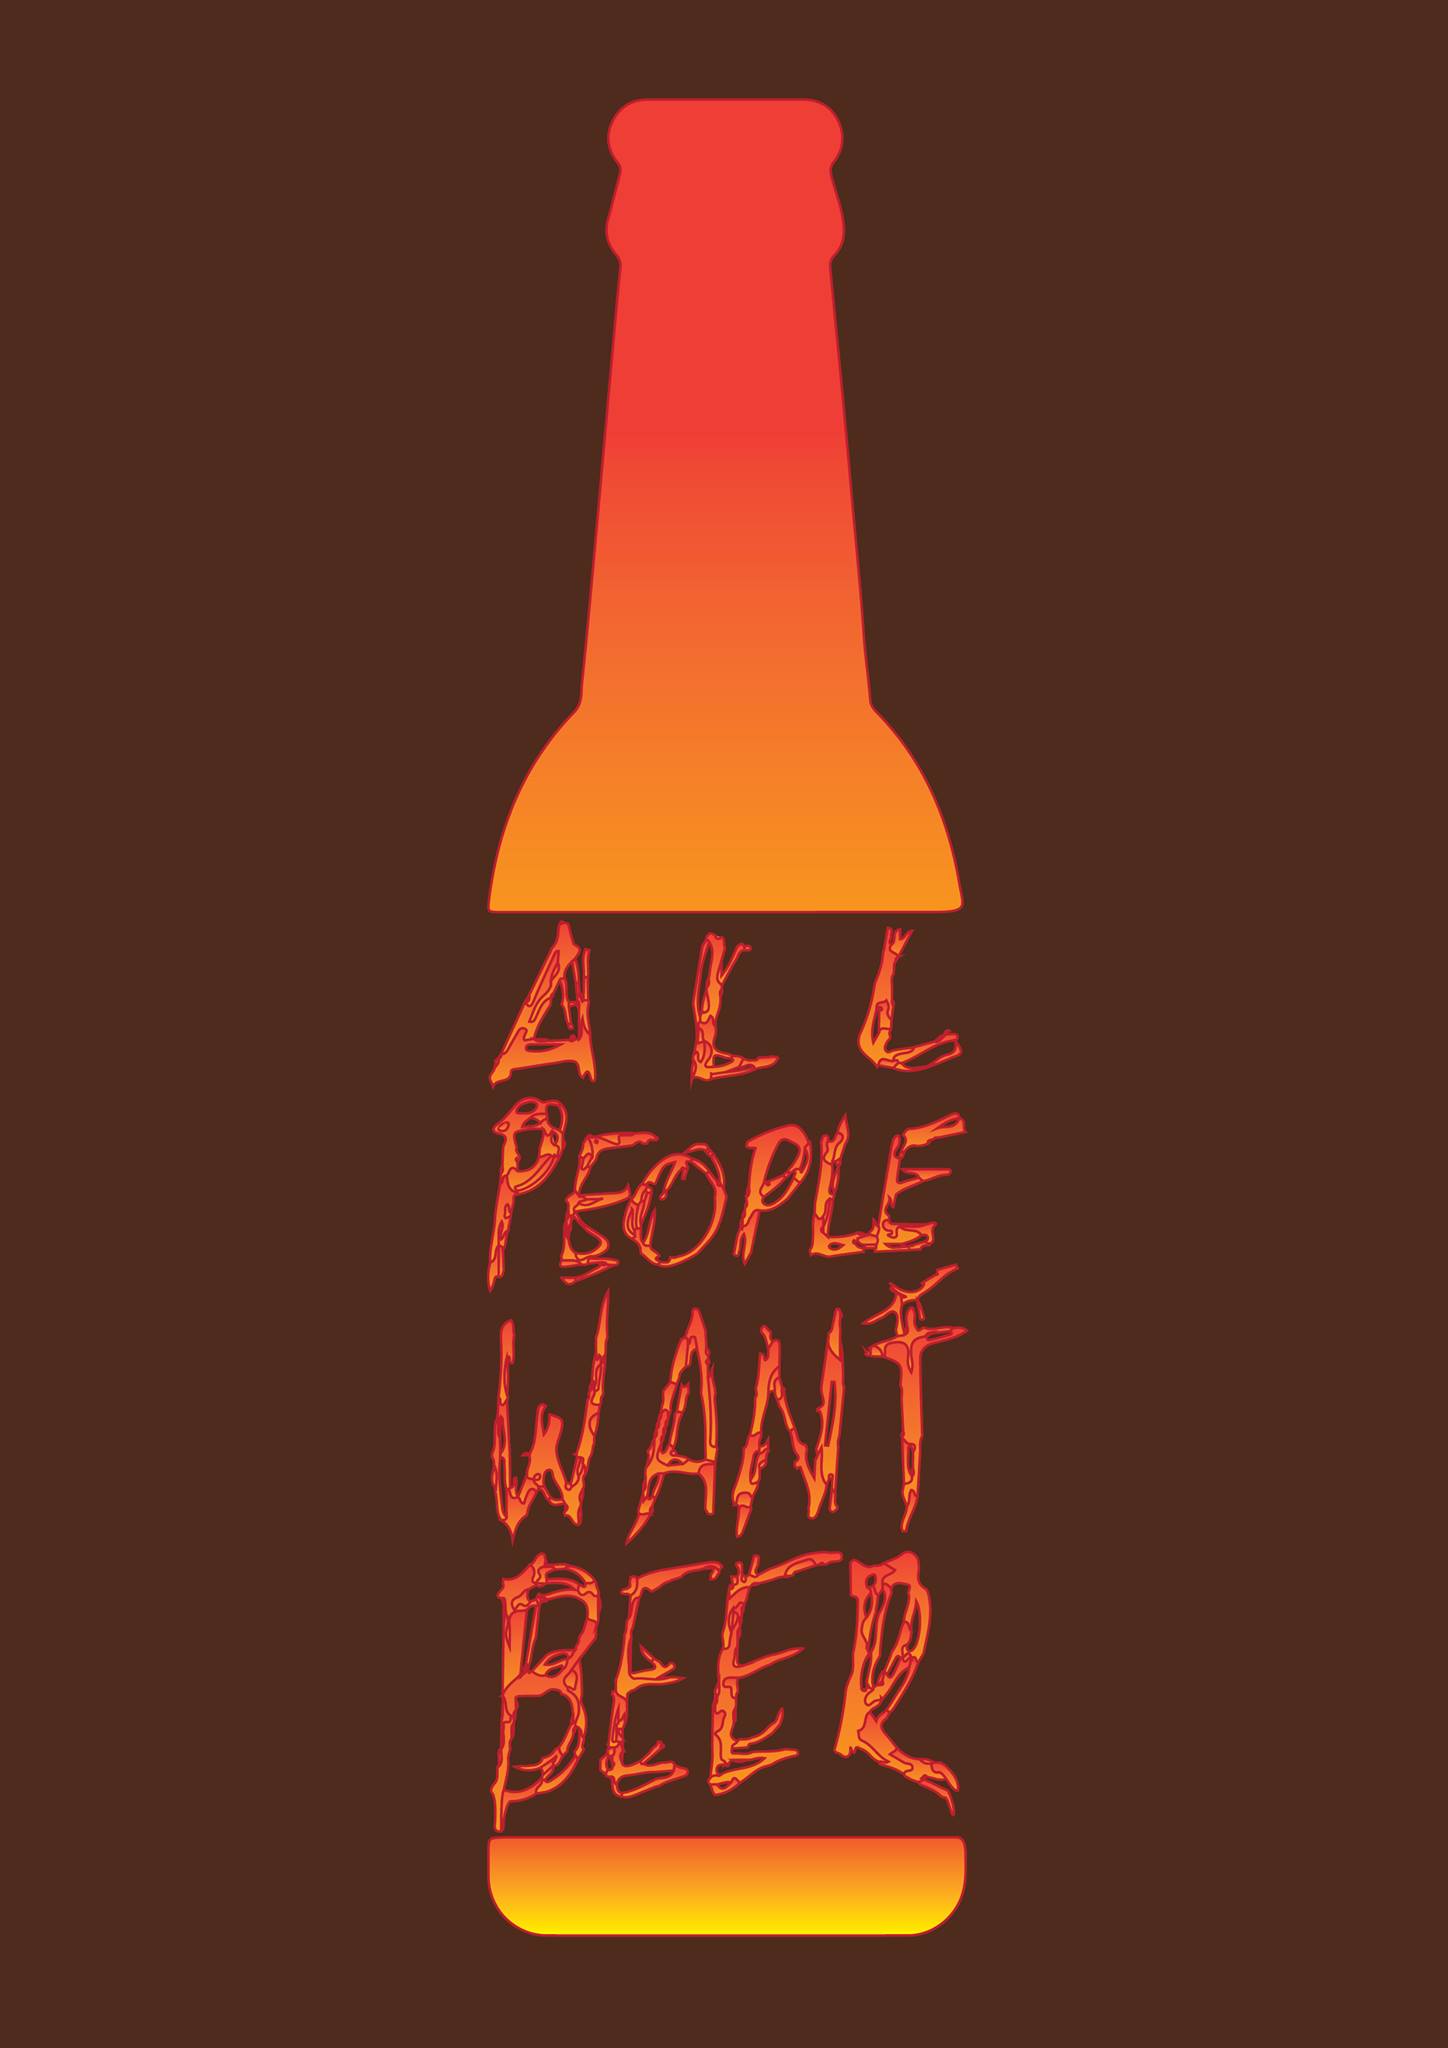 Molinfaing : All people want beer – Vernissage